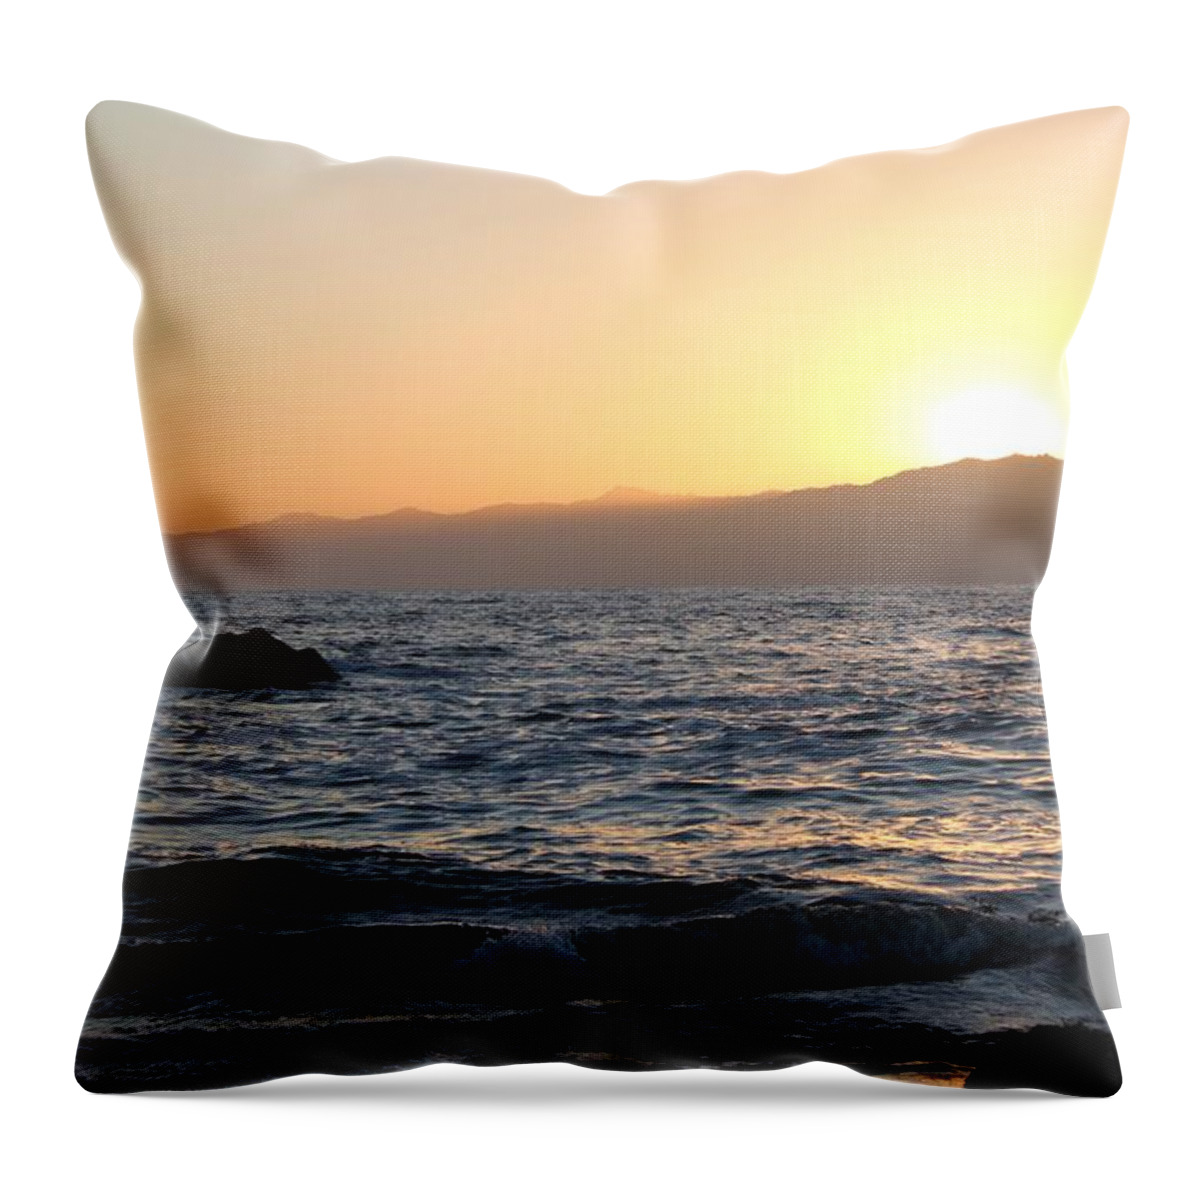 Sunset Throw Pillow featuring the photograph Evanescence by Caroline Lomeli